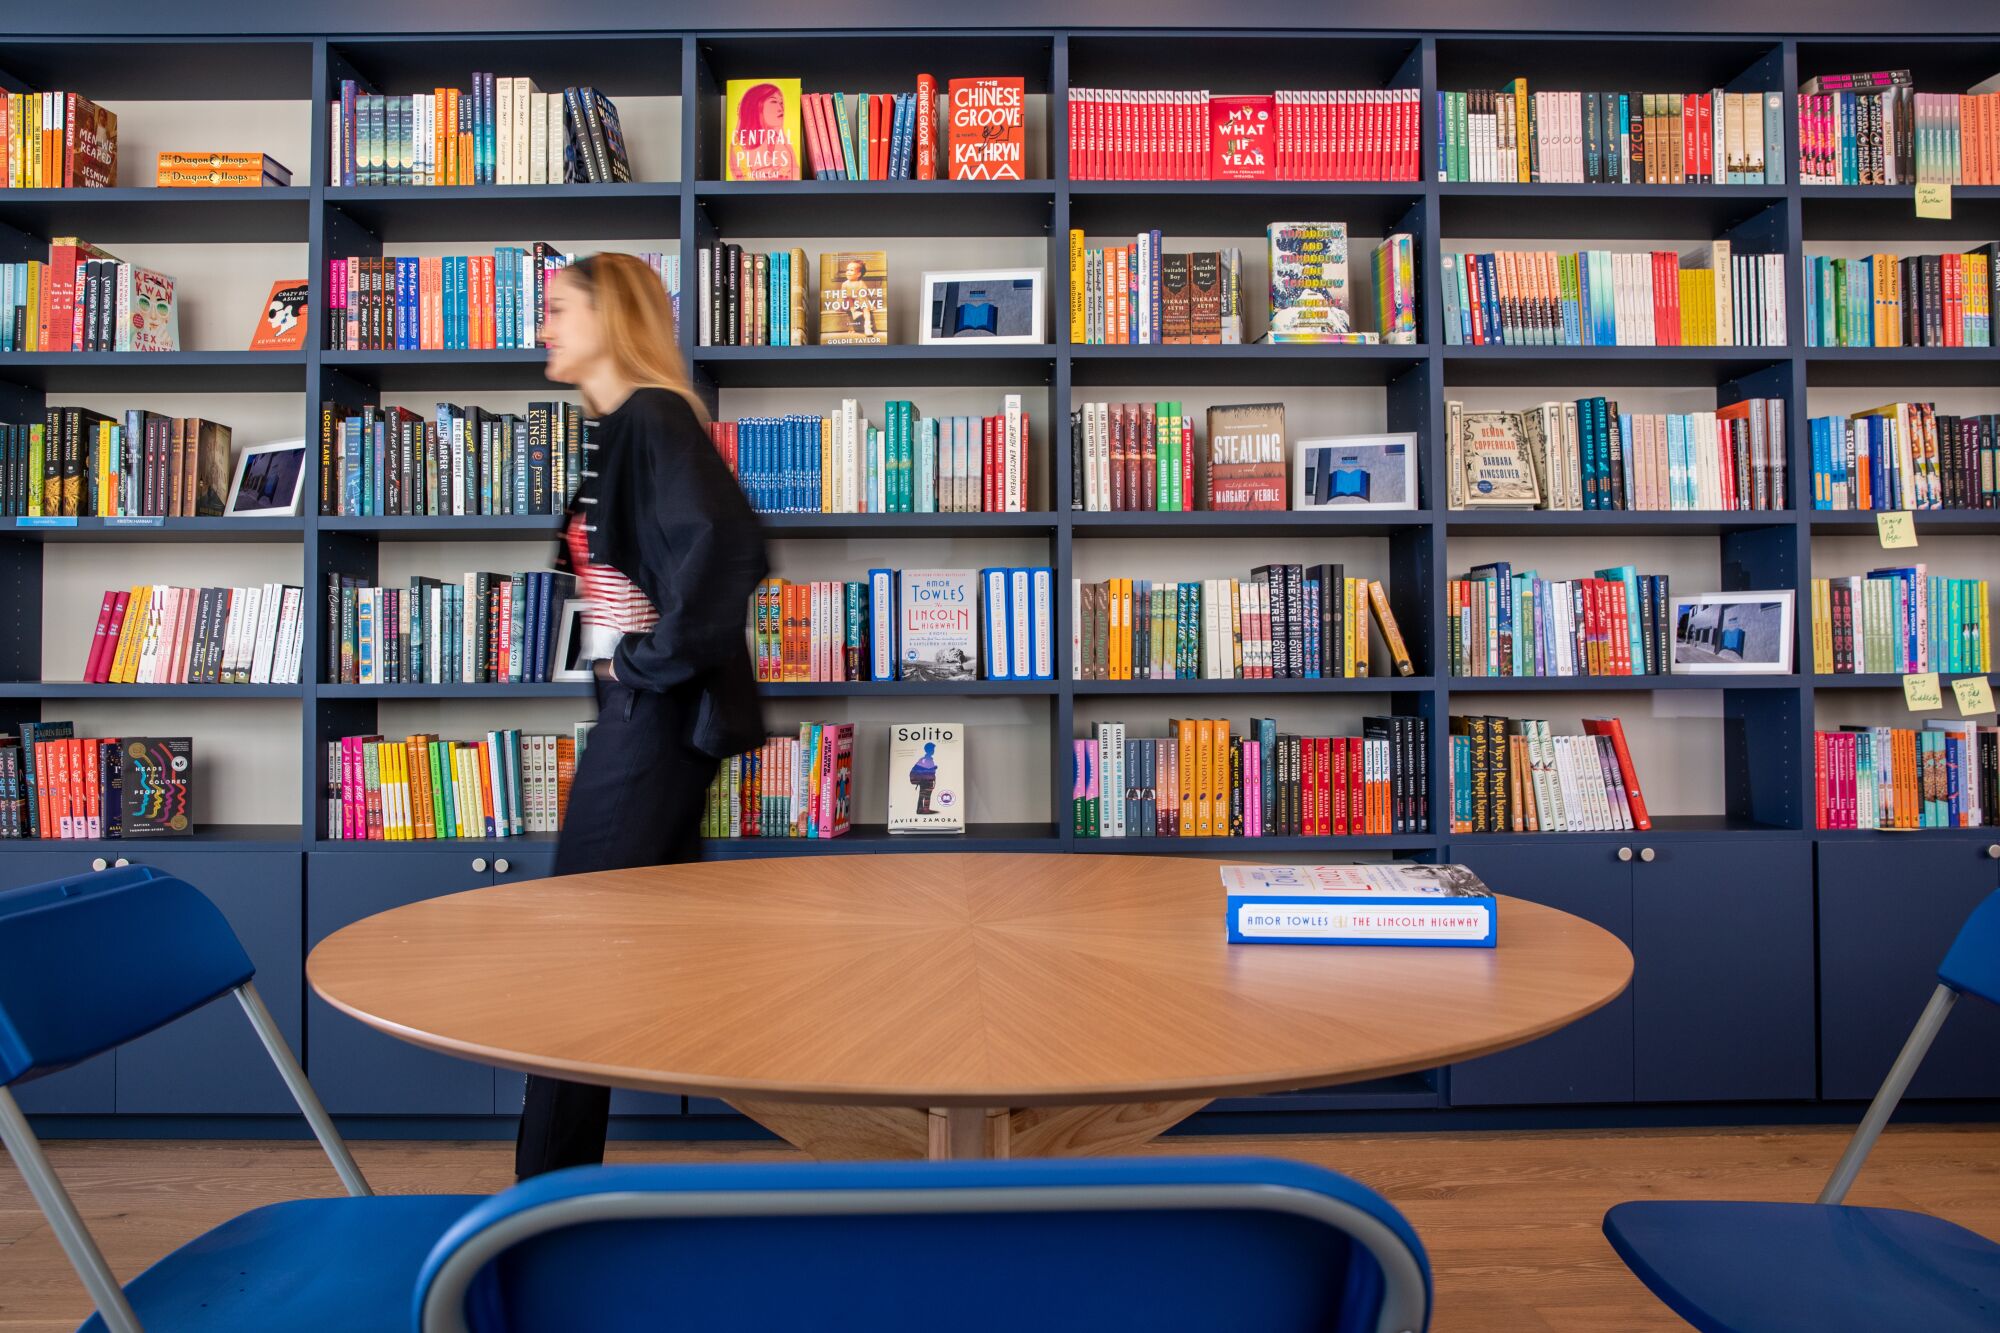 A woman walks between shelves of books and a round table with folding chairs around it.